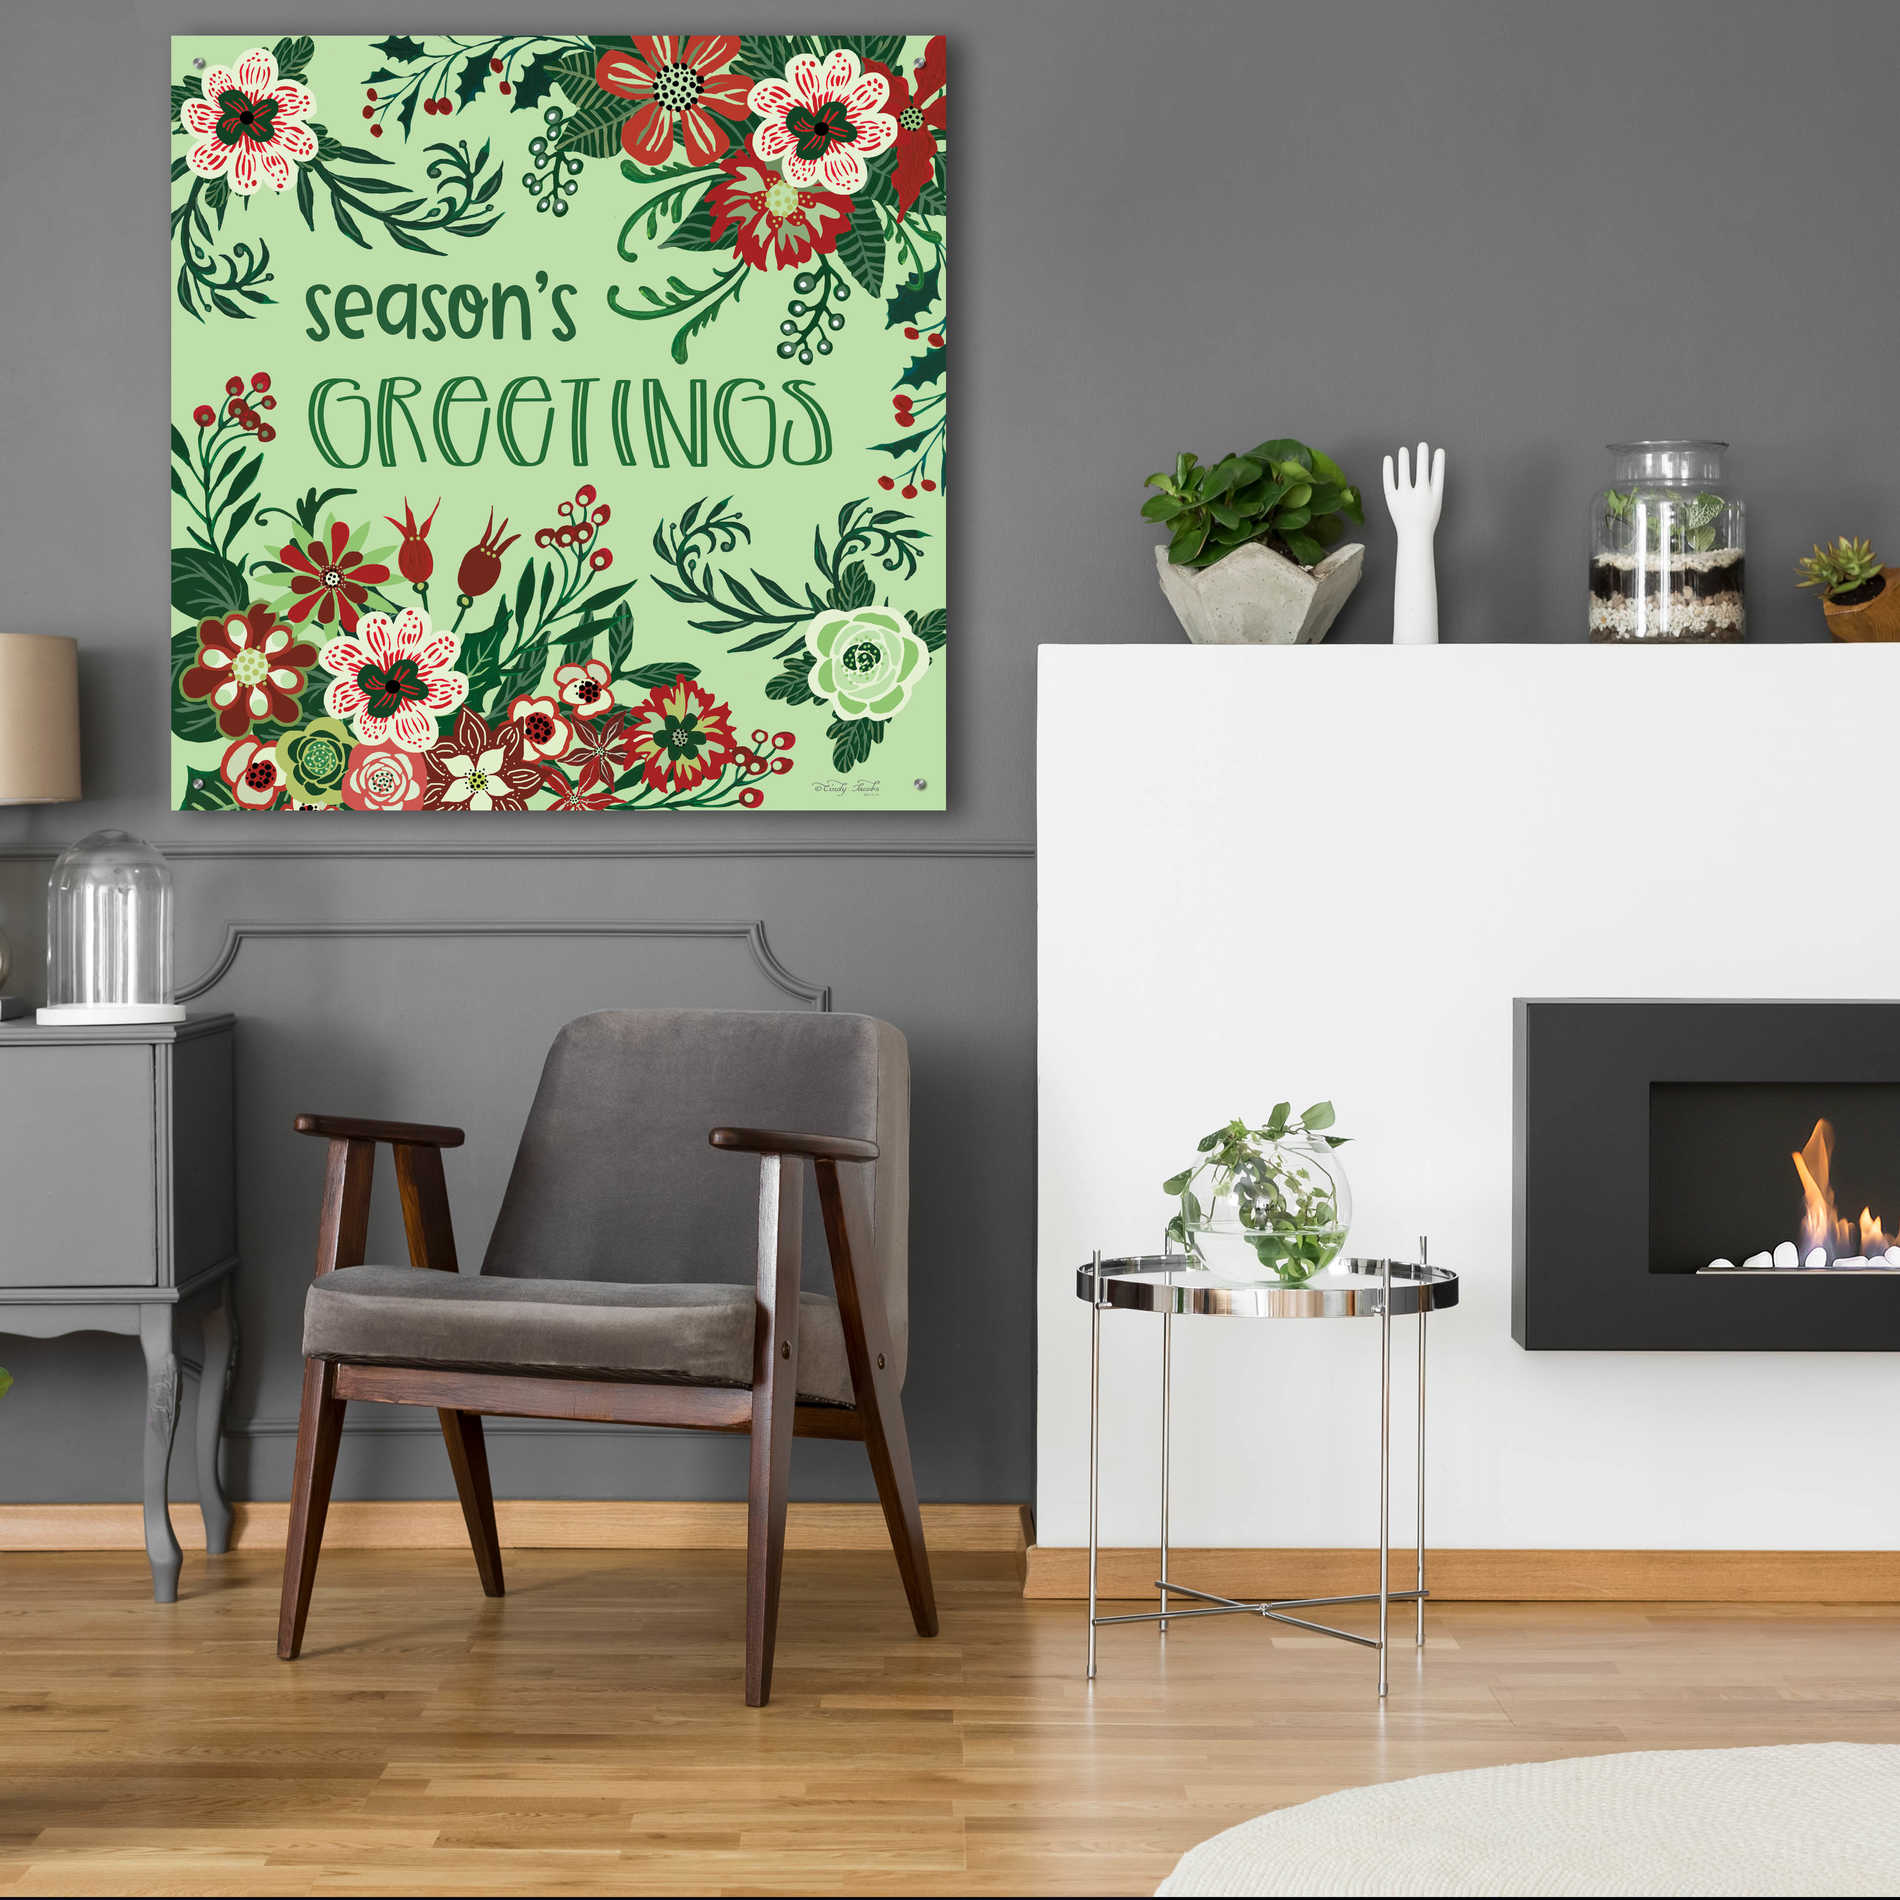 Epic Art 'Season's Greetings Florals' by Cindy Jacobs, Acrylic Glass Wall Art,36x36